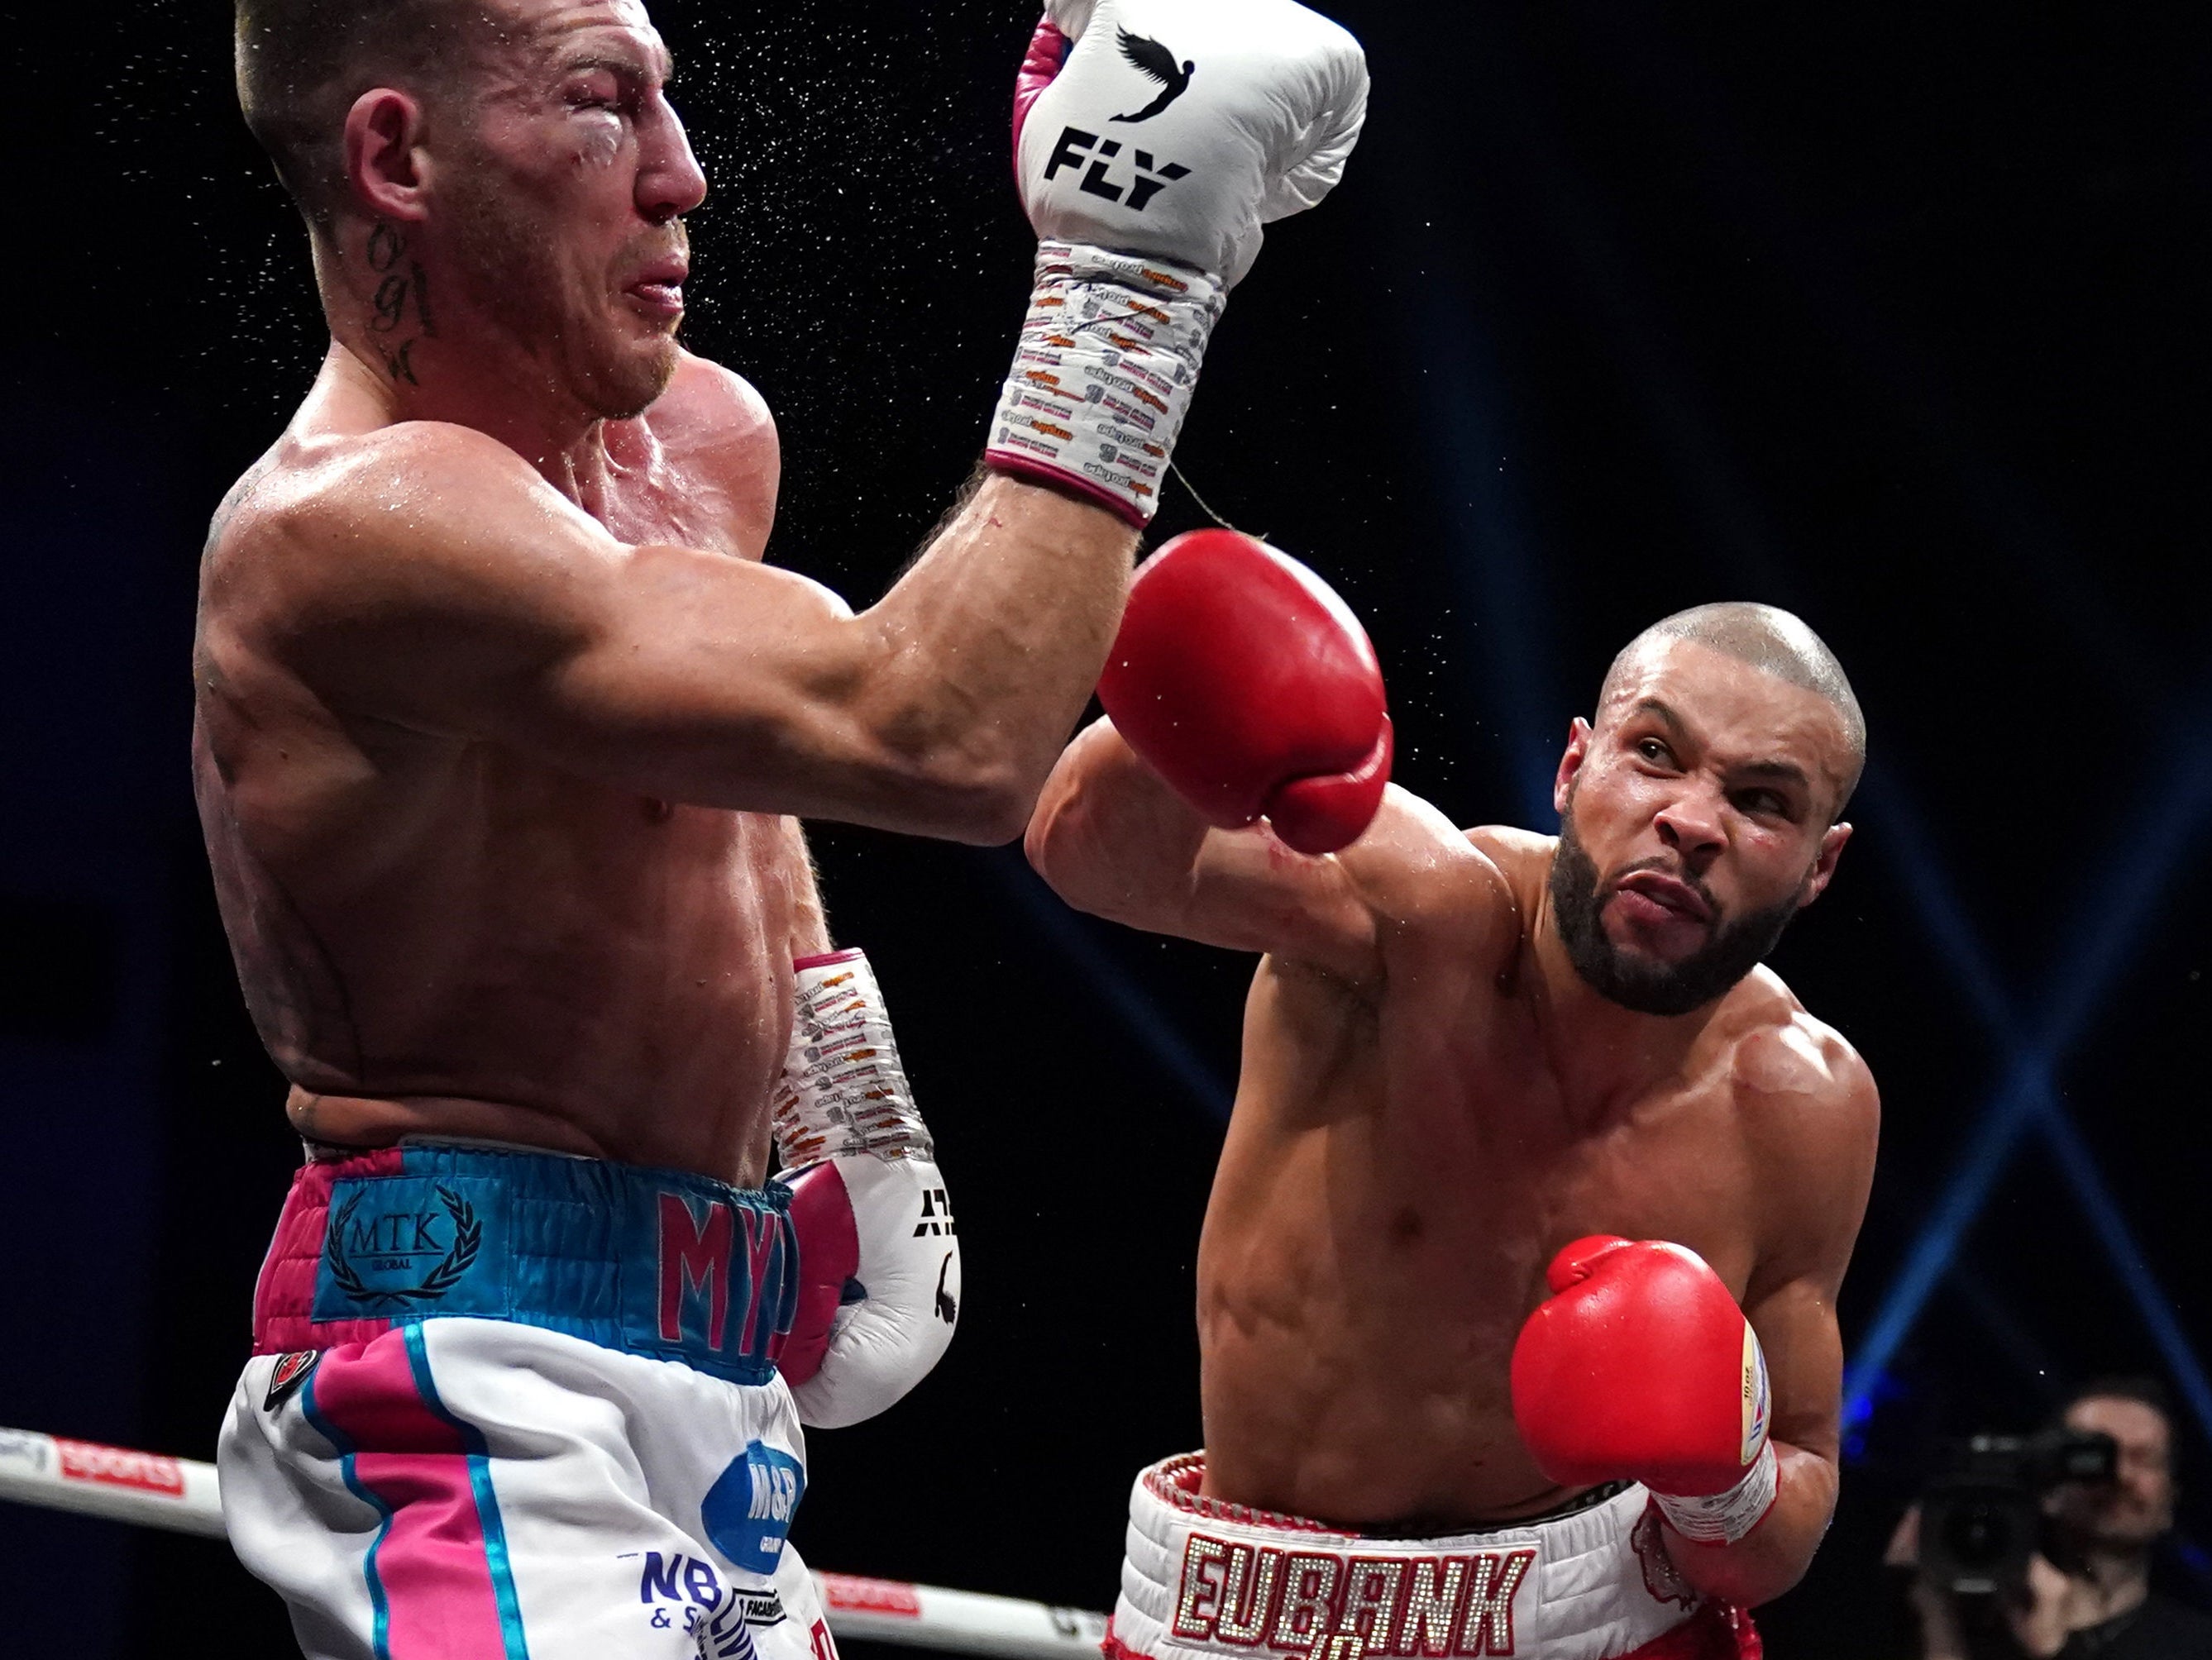 Chris Eubank Jr produced one of the performances of his career in Cardiff